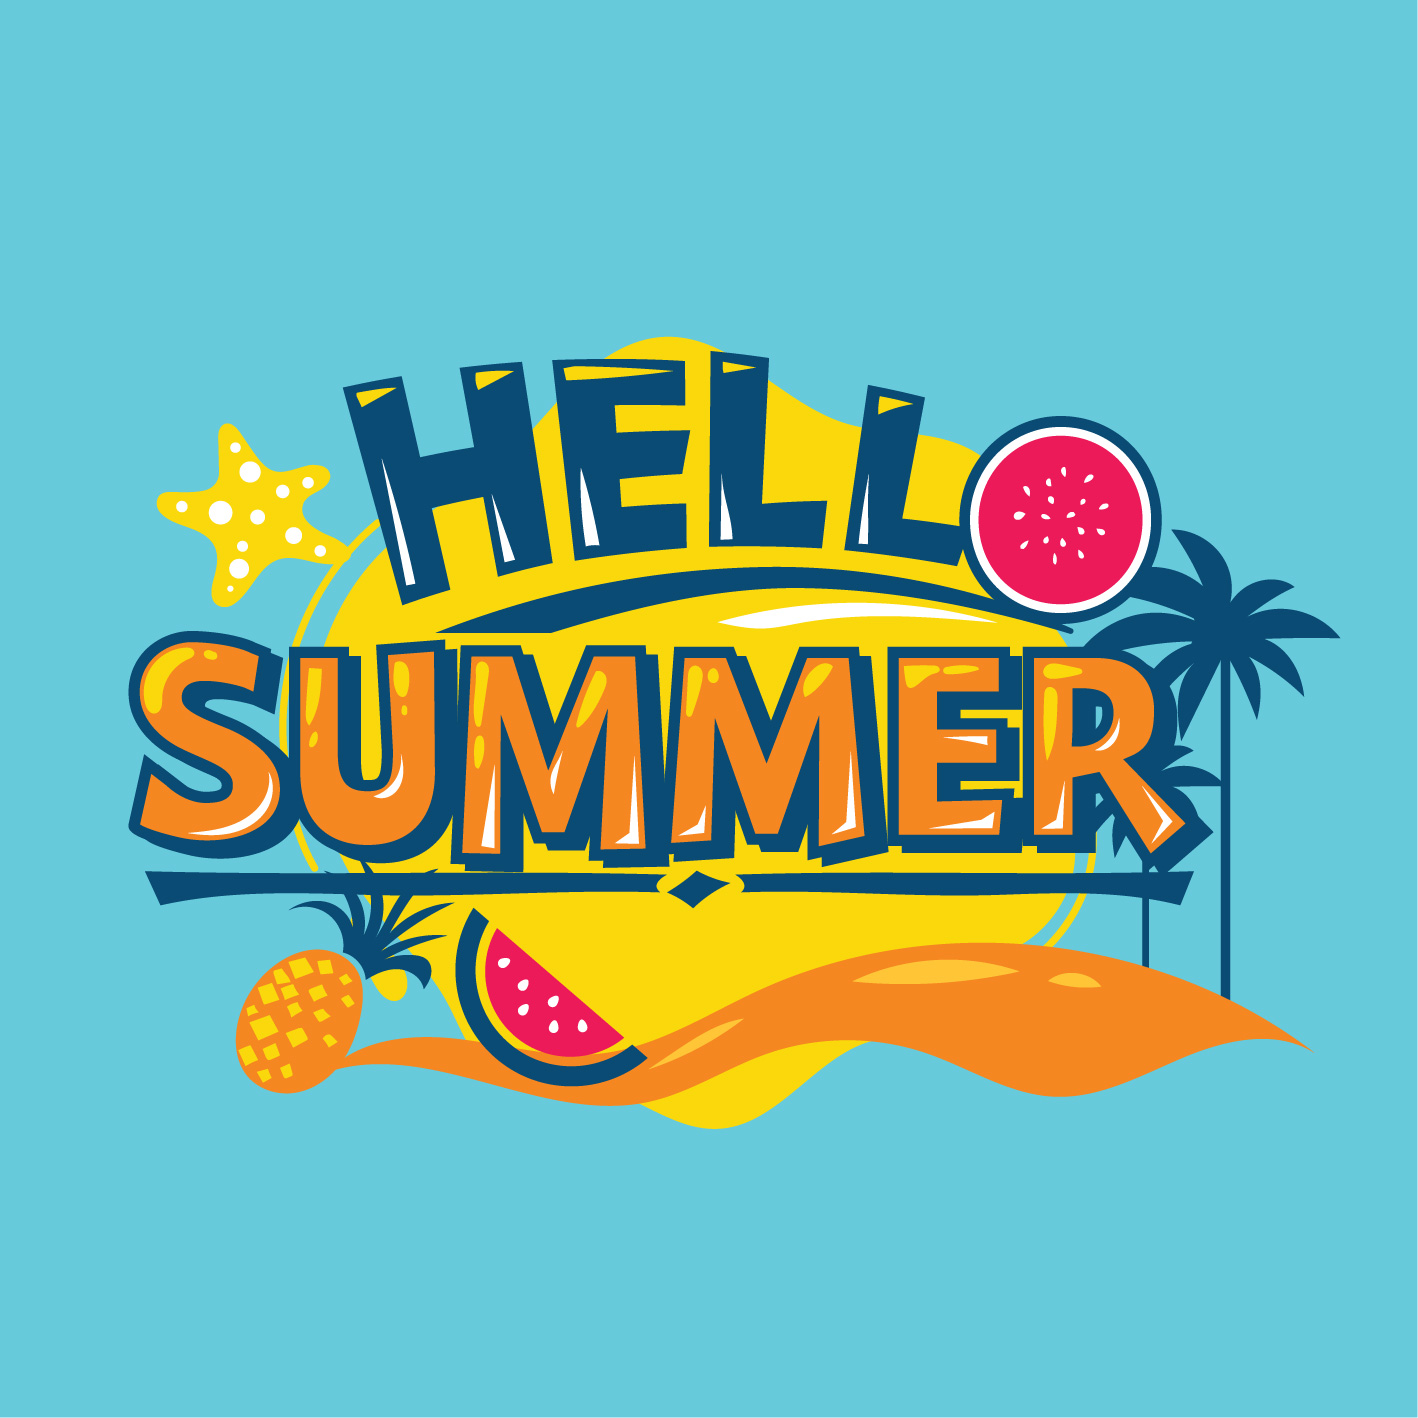 Download Hello Summer. Summer Holiday. Summer Quote 637921 ...